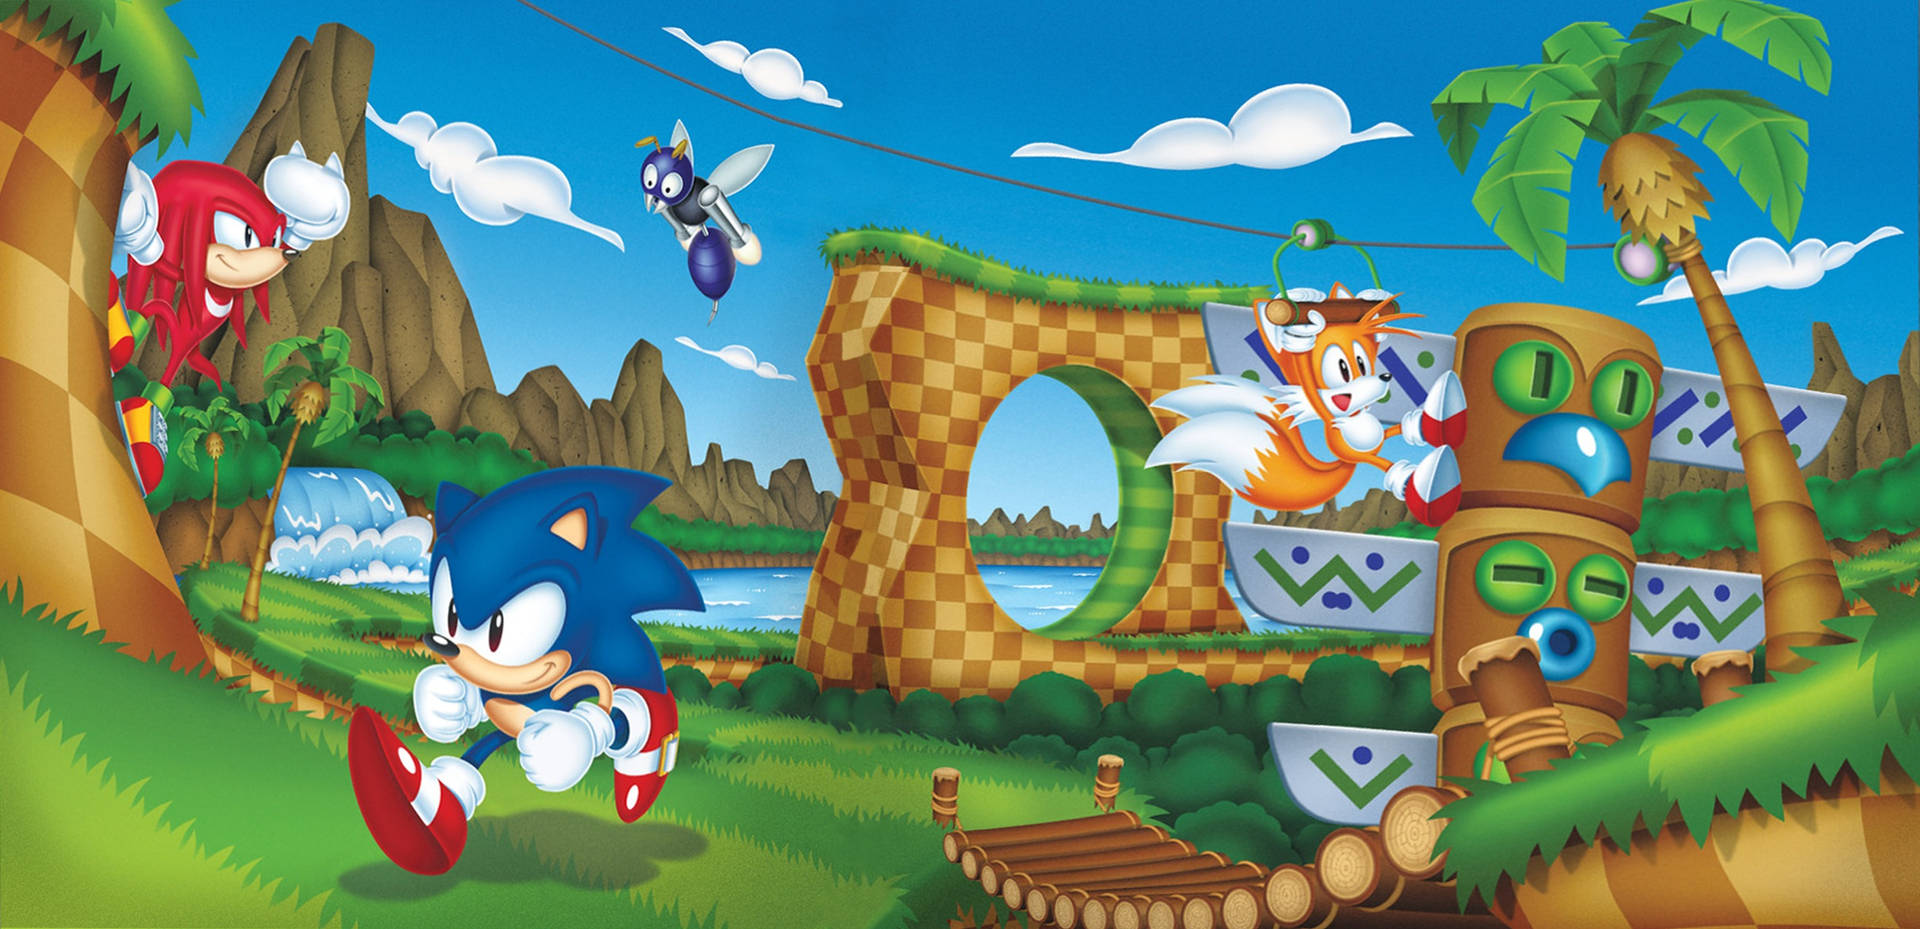 Green hill zone background by sonicmechaomega999 on DeviantArt  Best  background images Video game backgrounds Cartoon world